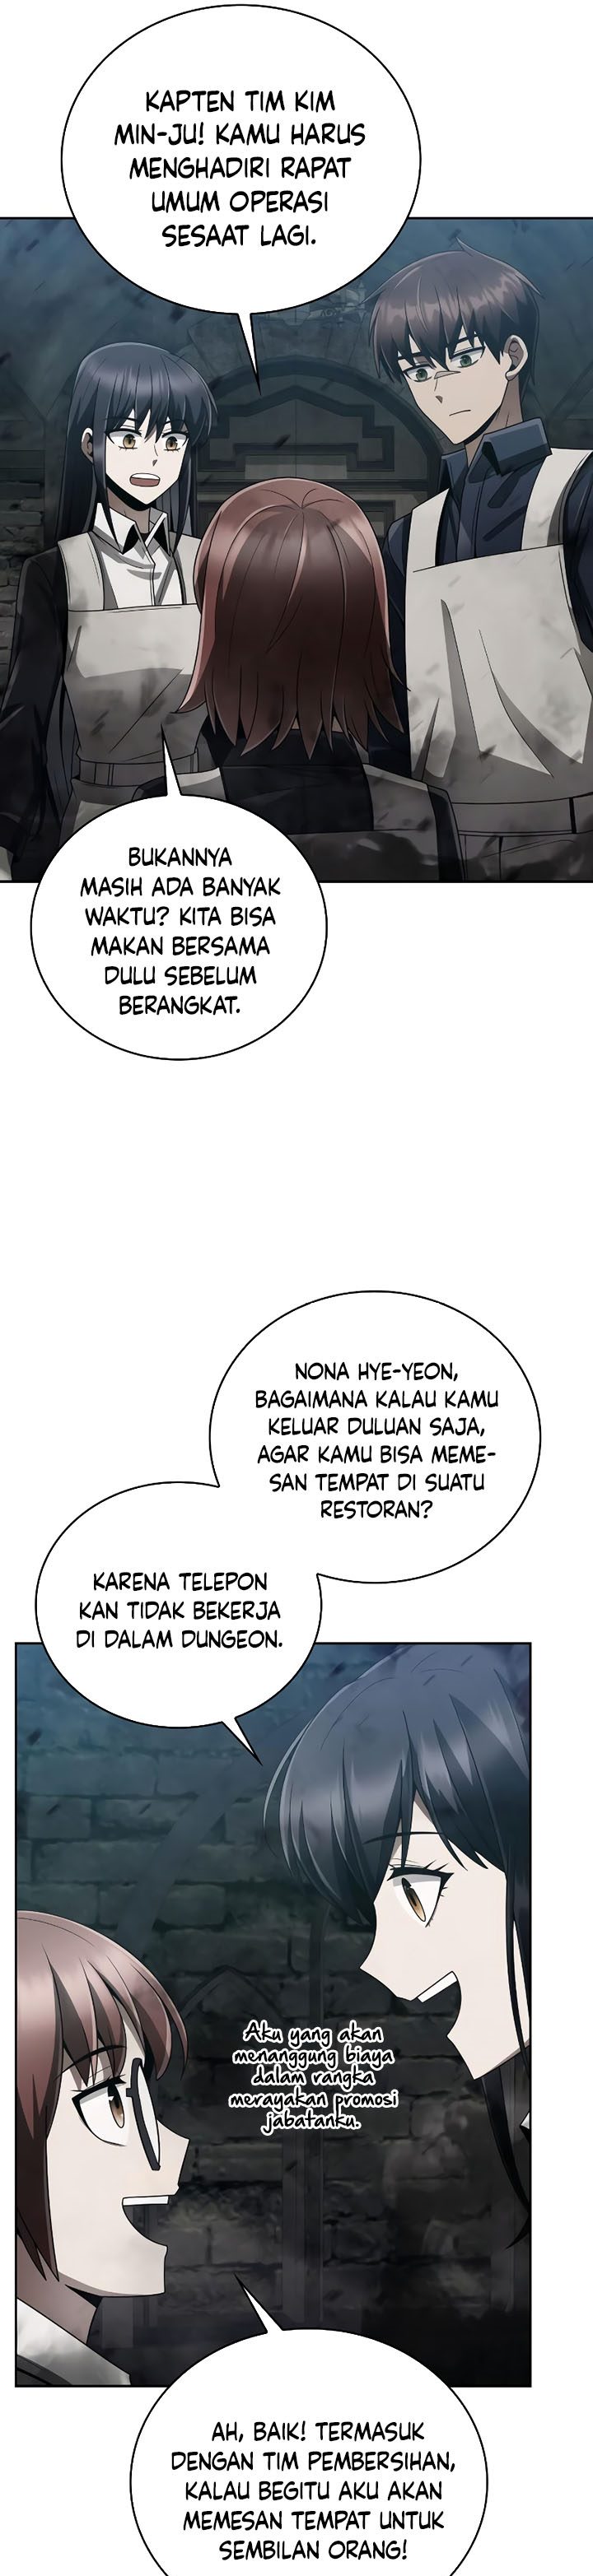 Dilarang COPAS - situs resmi www.mangacanblog.com - Komik clever cleaning life of the returned genius hunter 019 - chapter 19 20 Indonesia clever cleaning life of the returned genius hunter 019 - chapter 19 Terbaru 16|Baca Manga Komik Indonesia|Mangacan